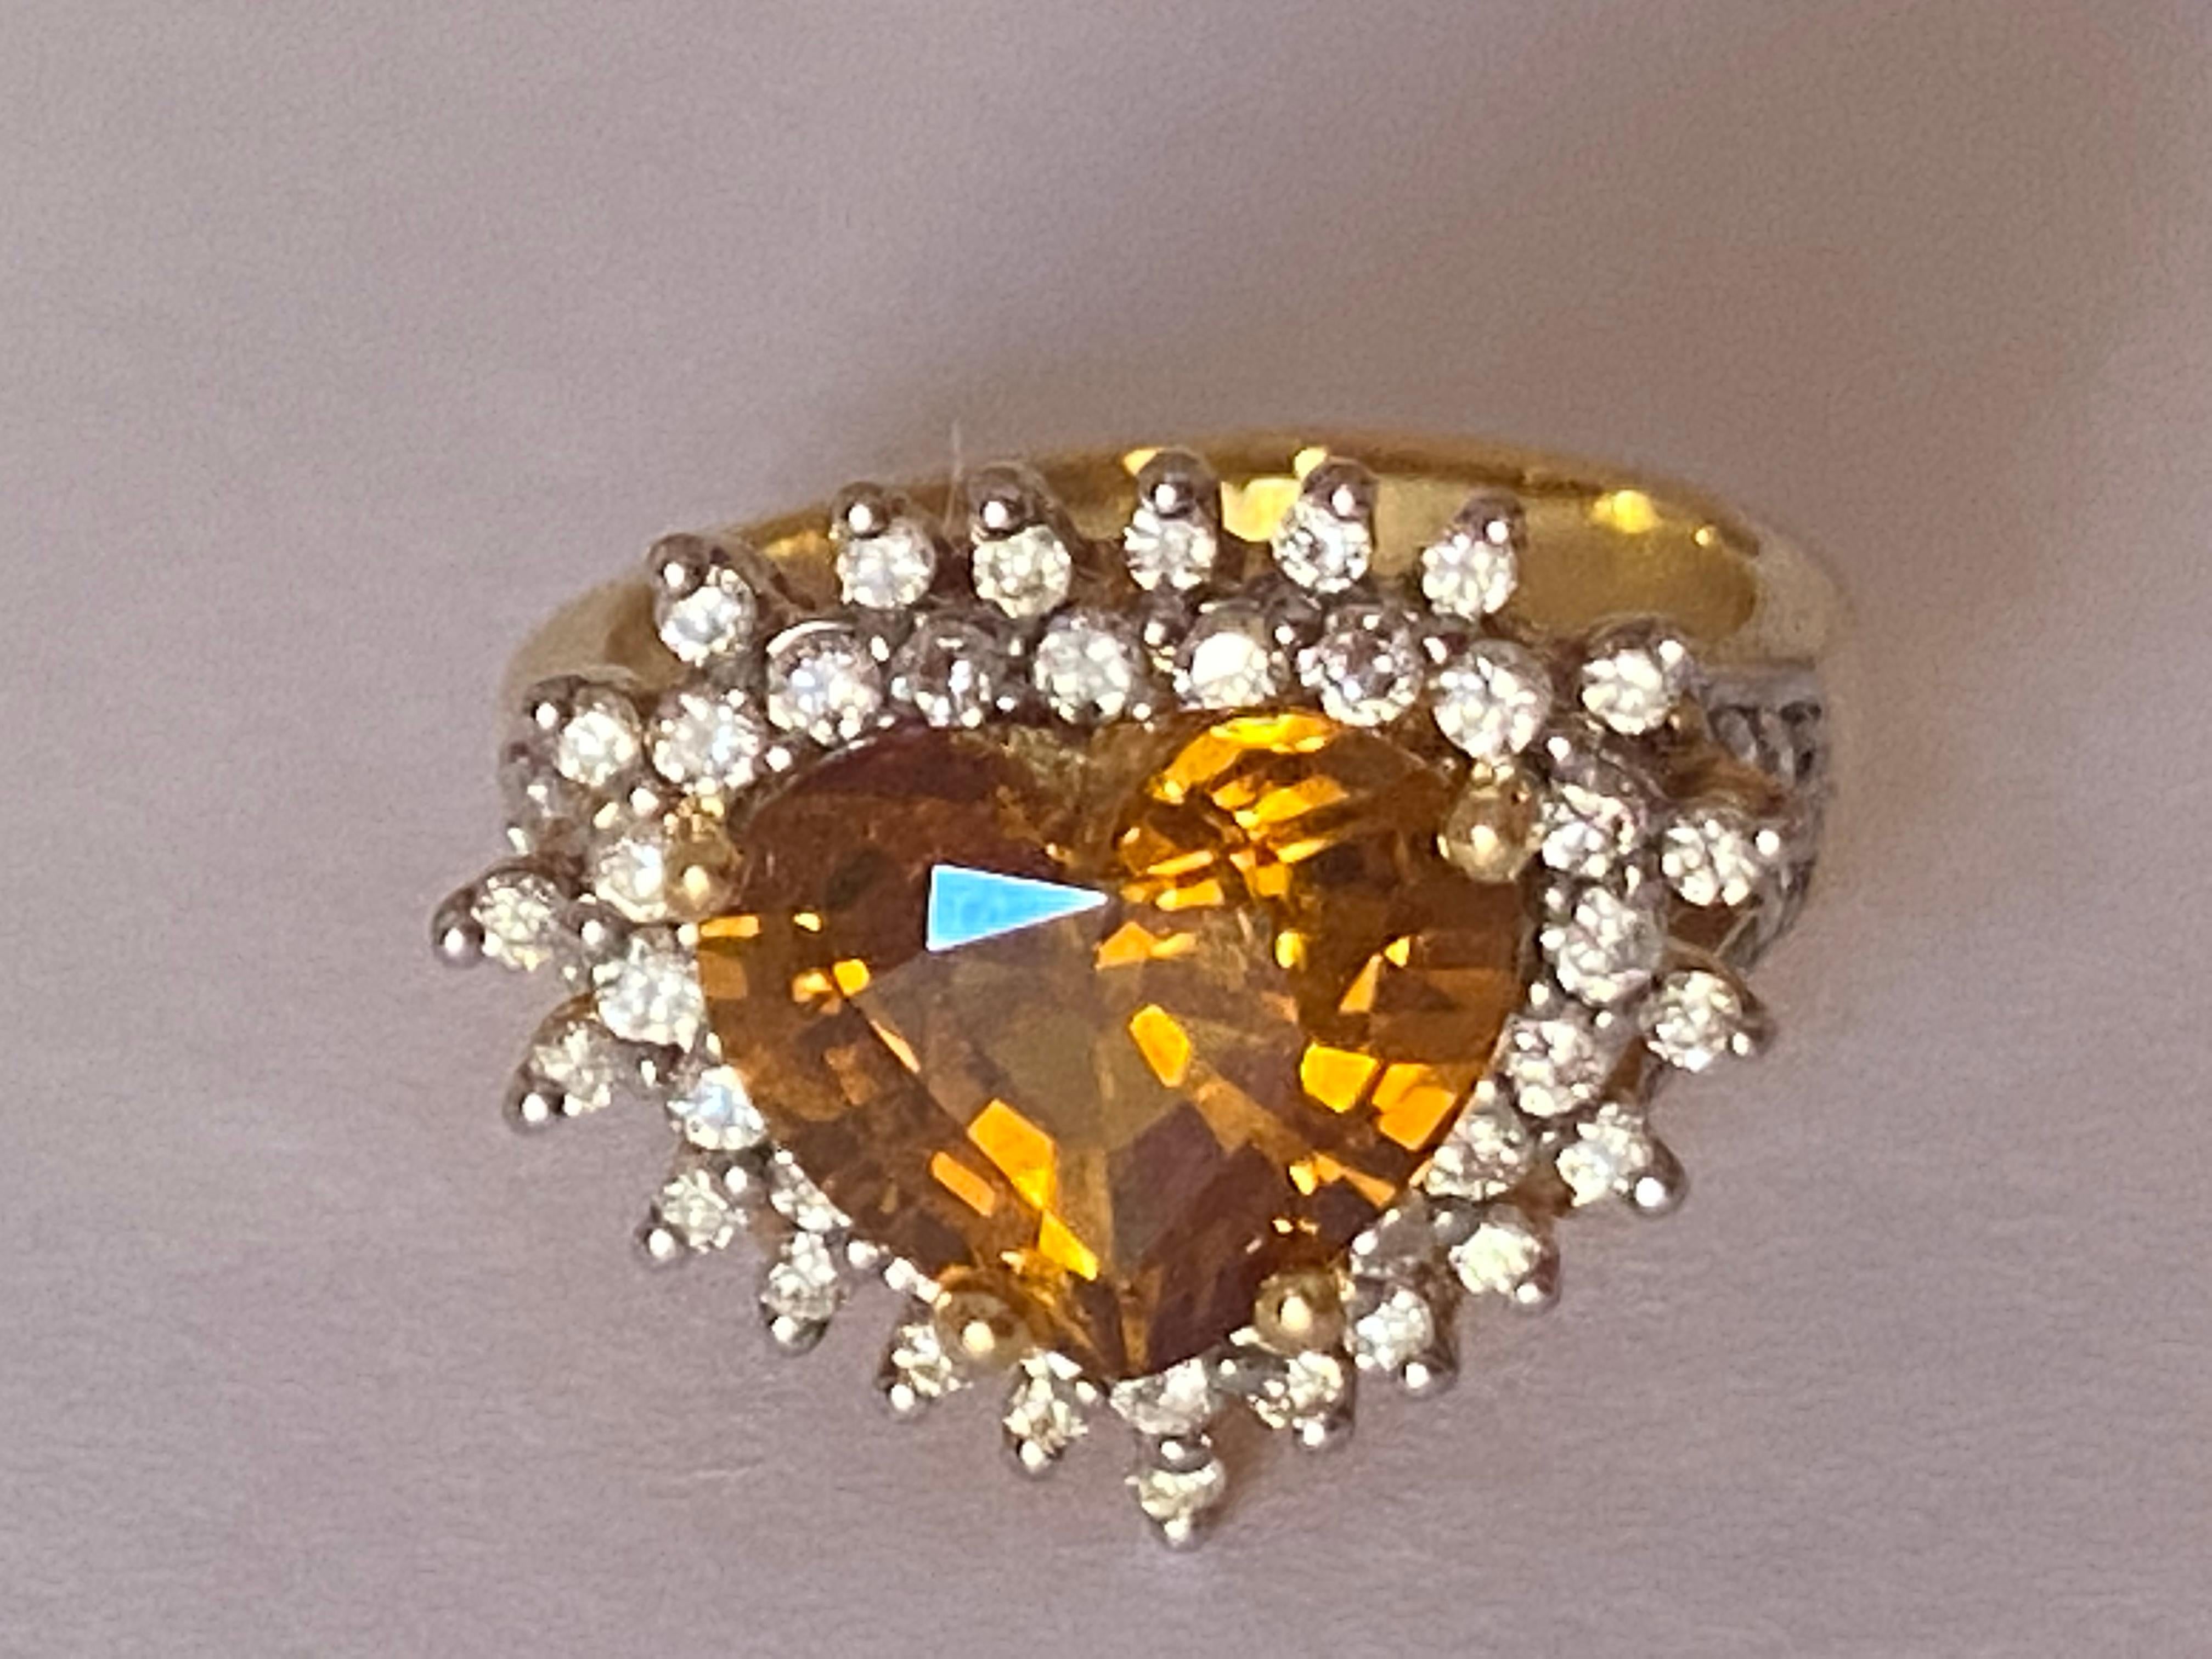 Exclusive design in 18k gold with heart cut sapphire ct 4,41 and round brilliant cut diamonds ct 0,97 F/VS. 
Handmade by artisan goldsmith.
Excellent manufacture.
Complete with certificate.
Europe size 49.
Note: on my free shipment, taxes and duty